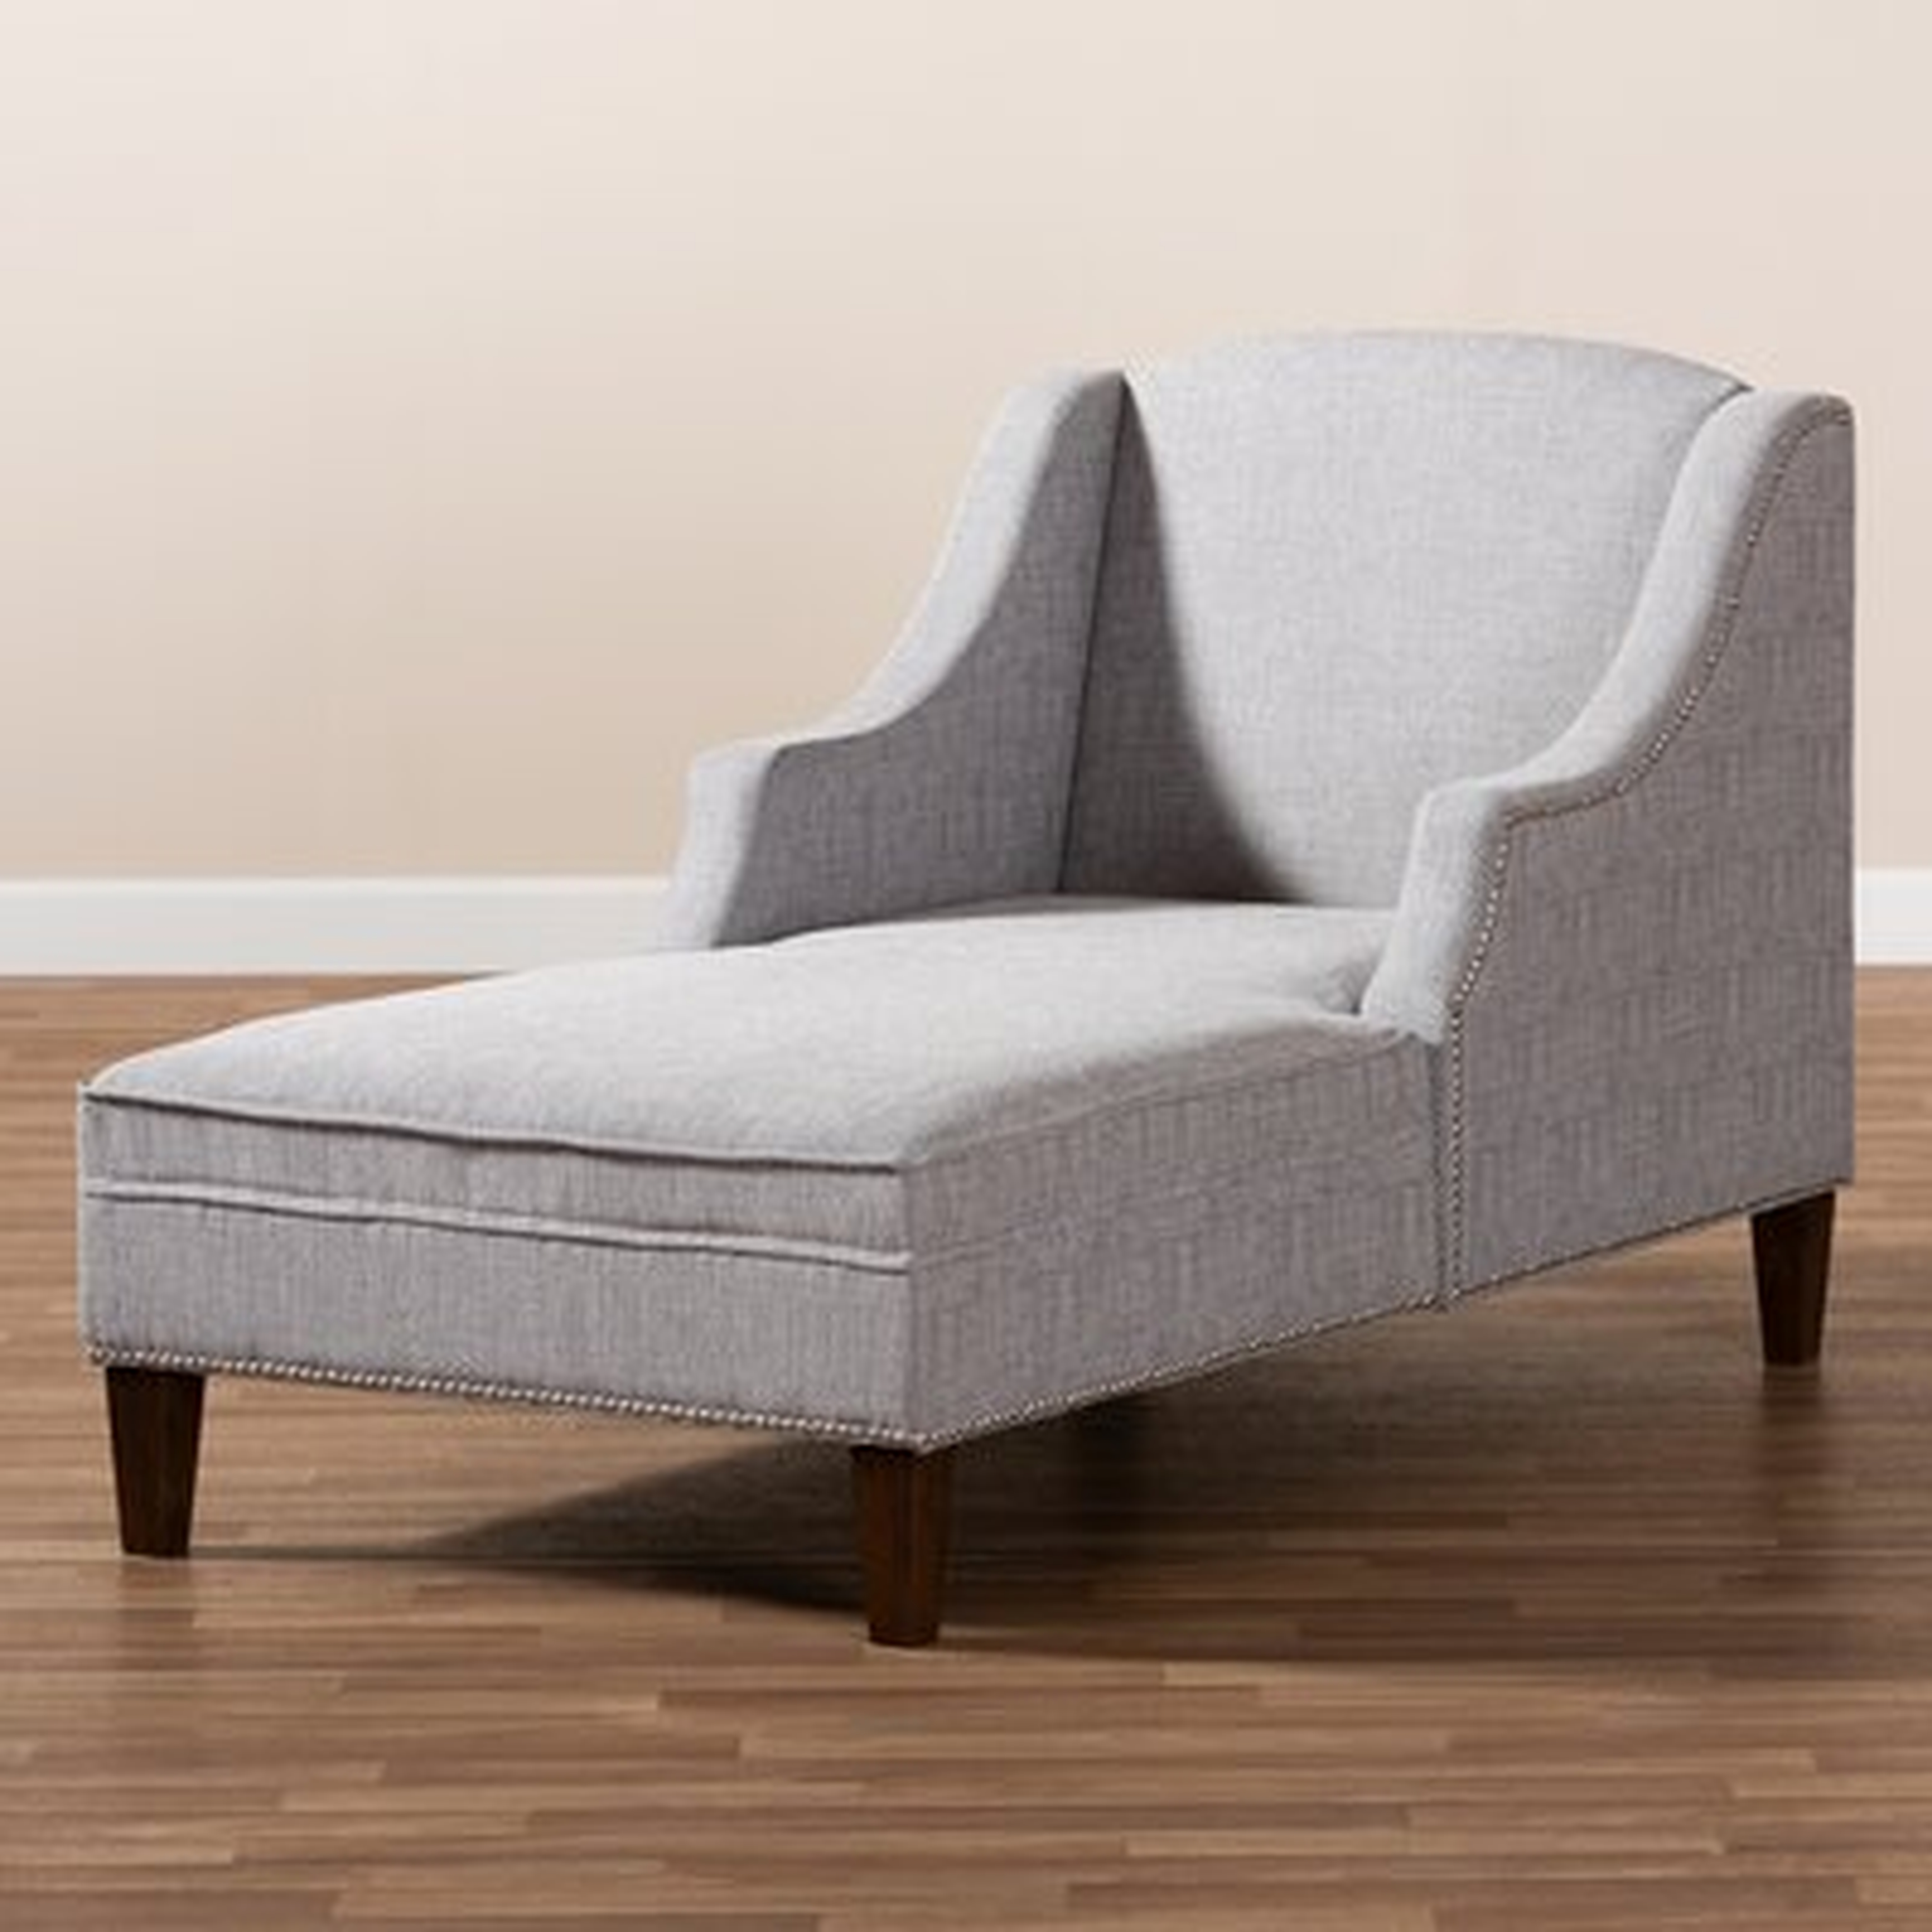 Cetus Fabric Upholstered Chaise Lounge - Wayfair